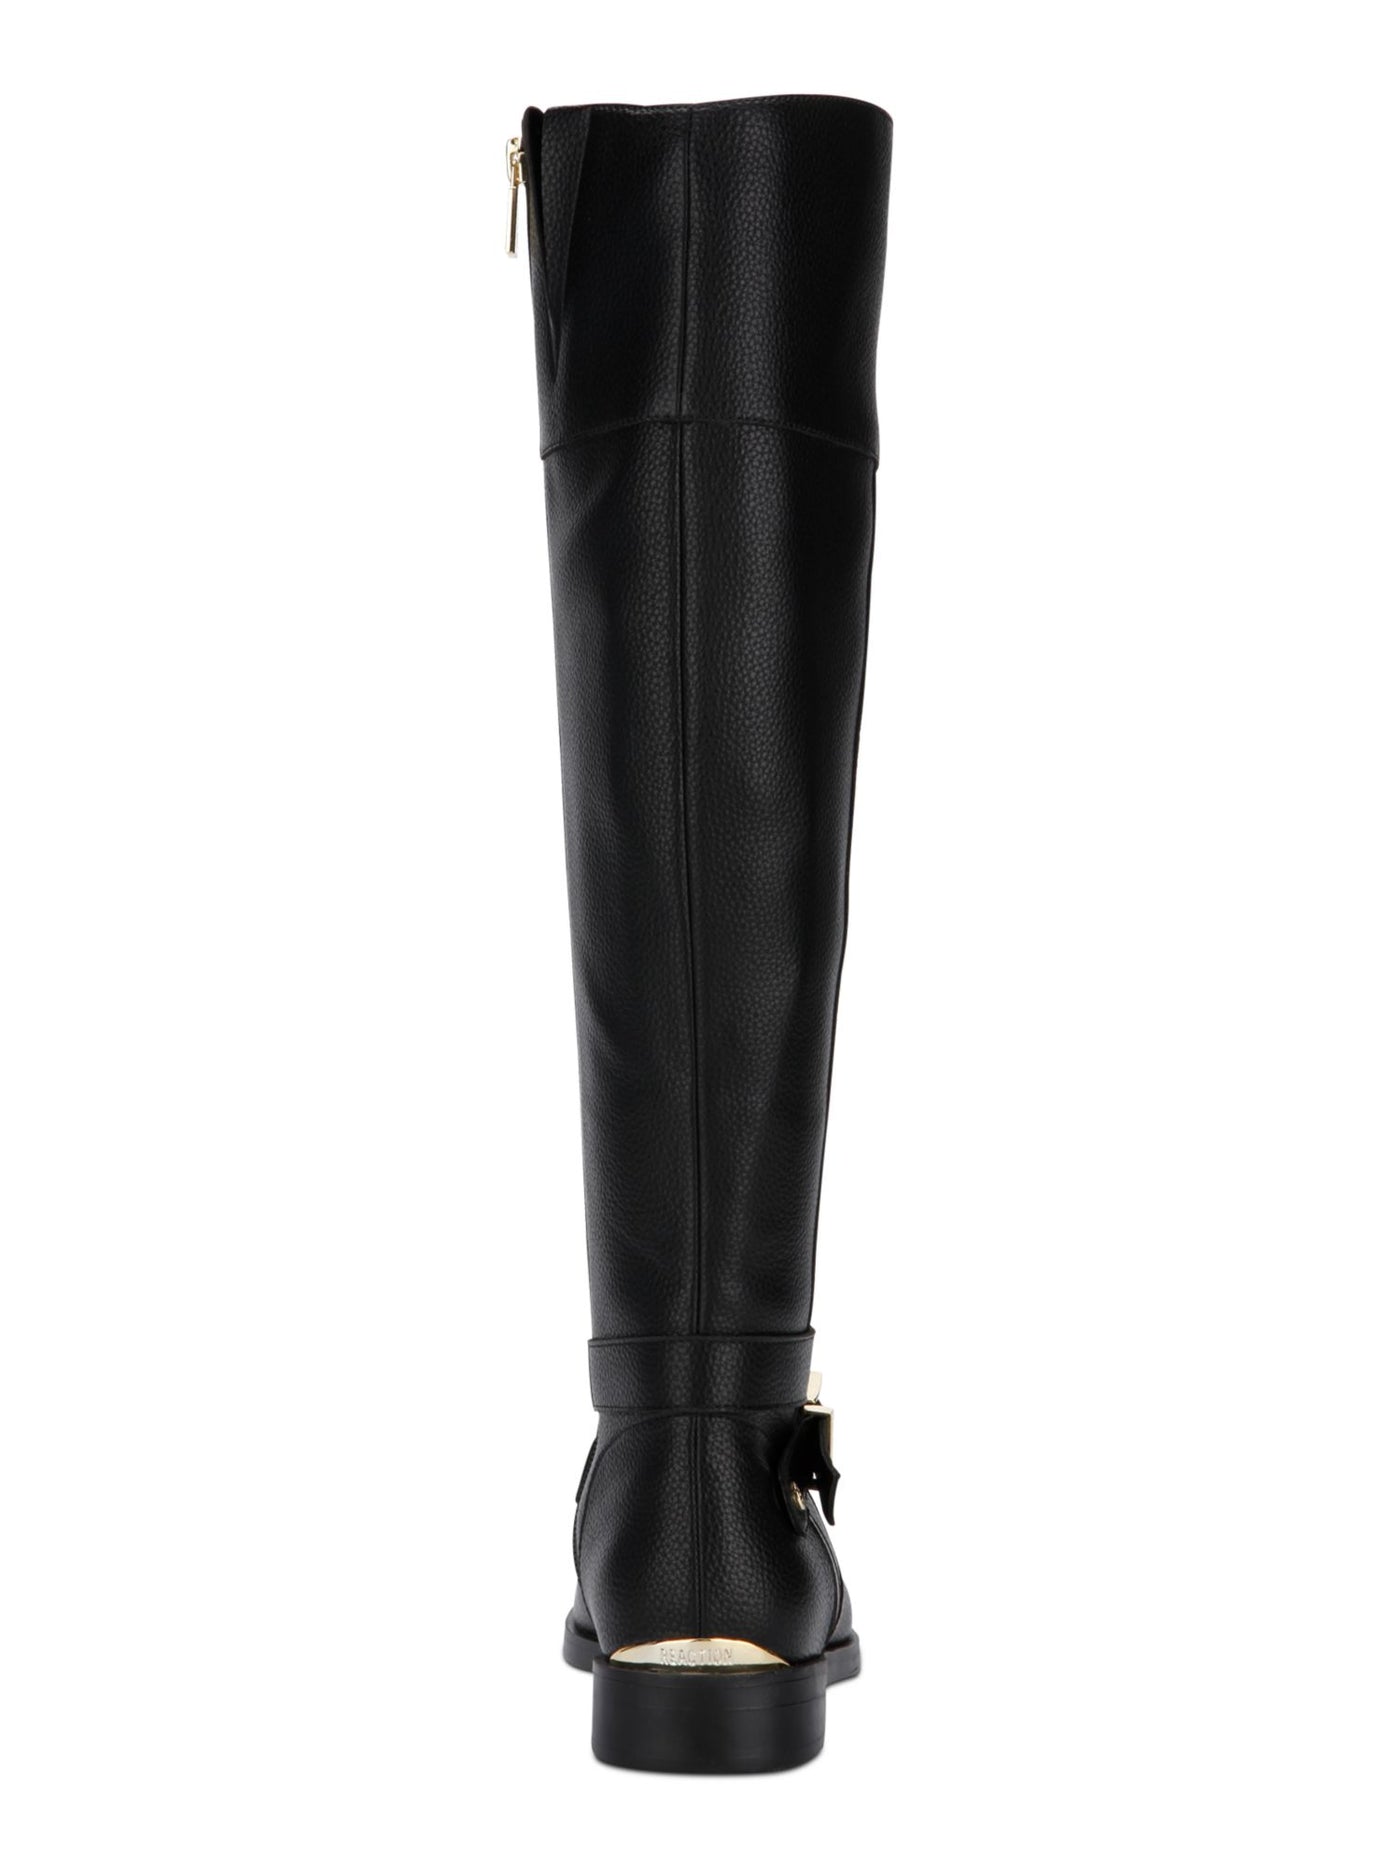 KENNETH COLE Womens Black Gold-Tone Buckle And Heal Accent Buckle Accent Wind Almond Toe Zip-Up Riding Boot 5.5